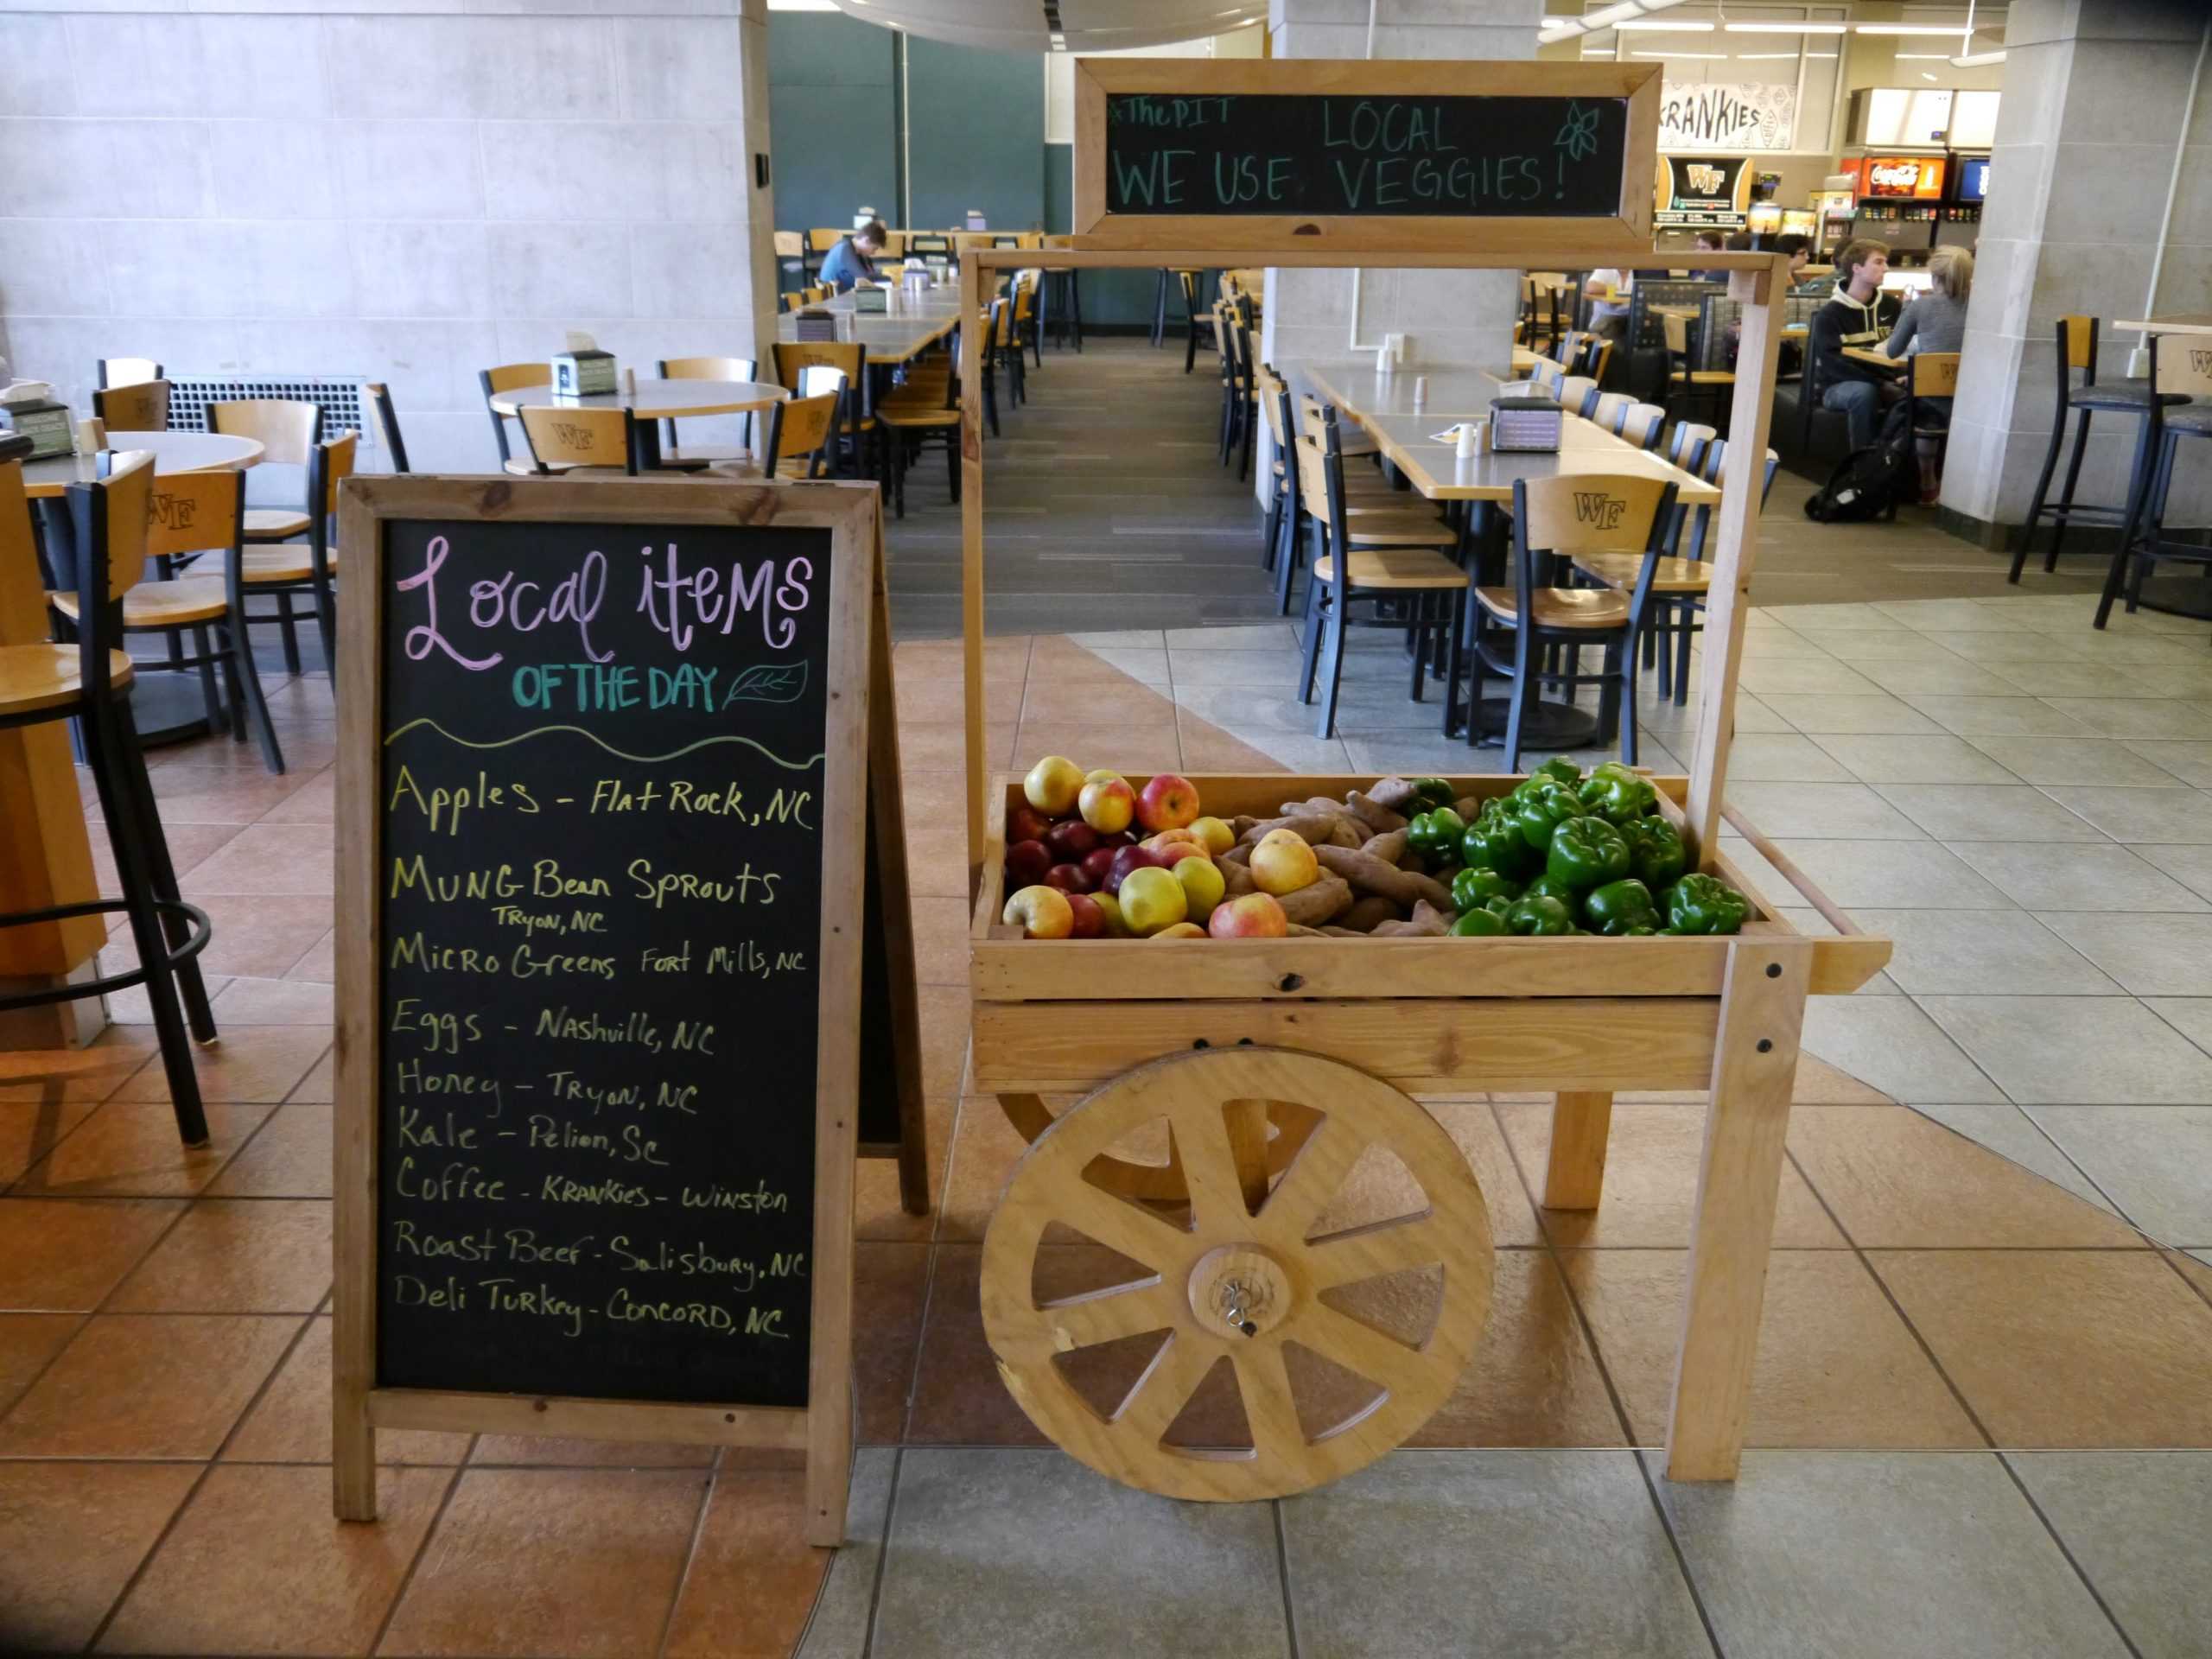 Campus contends healthy eating options